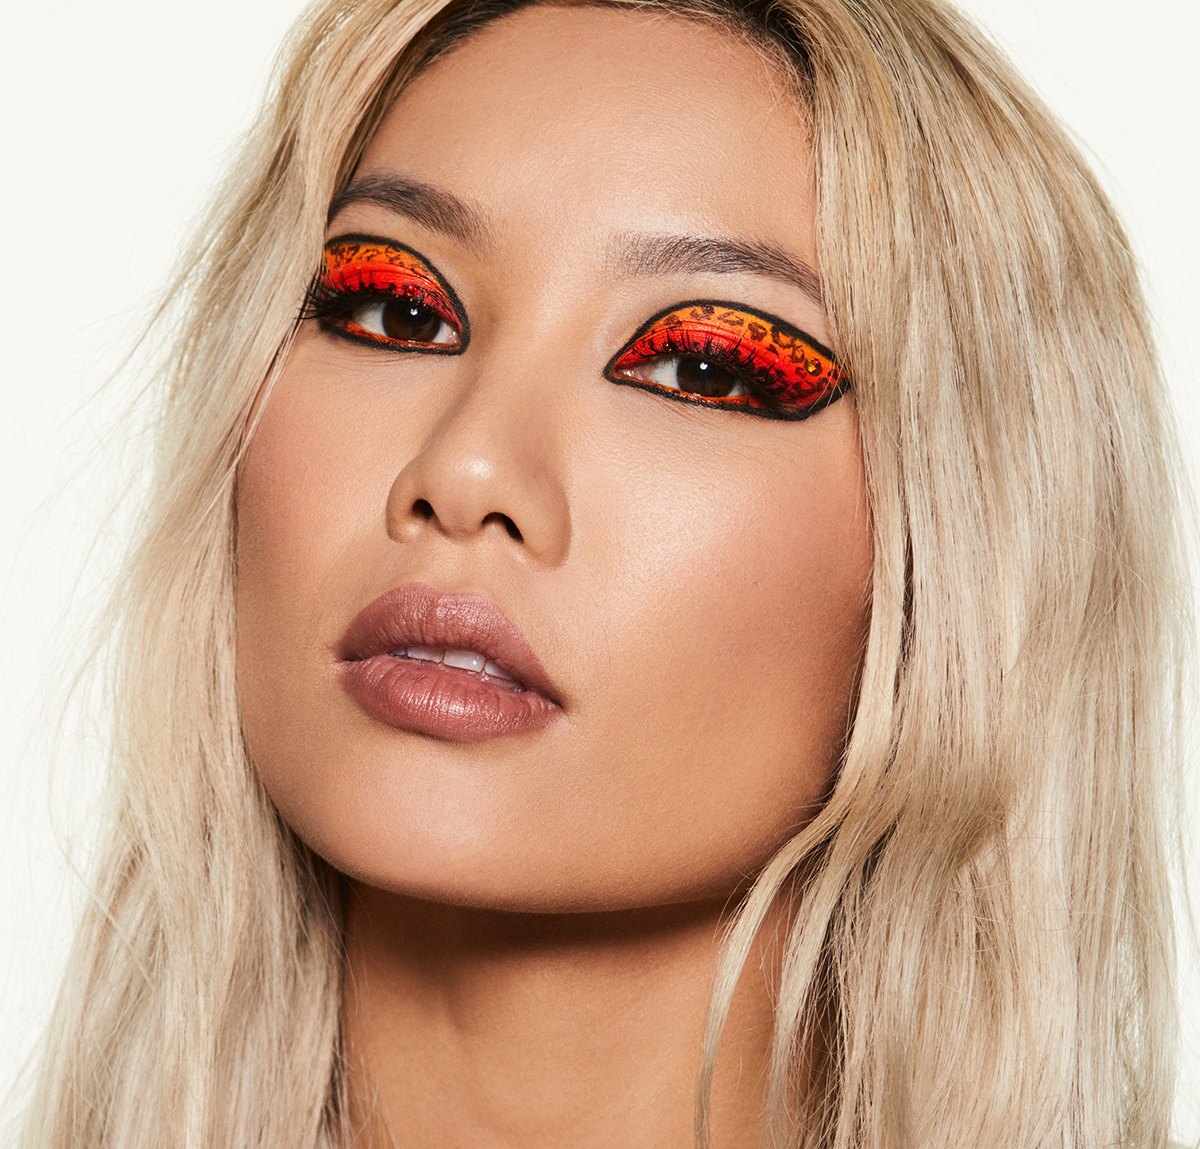 støvle Fugtig træfning Cheetos-Inspired Hair, Makeup and Nail Looks You Need to Try ASAP!